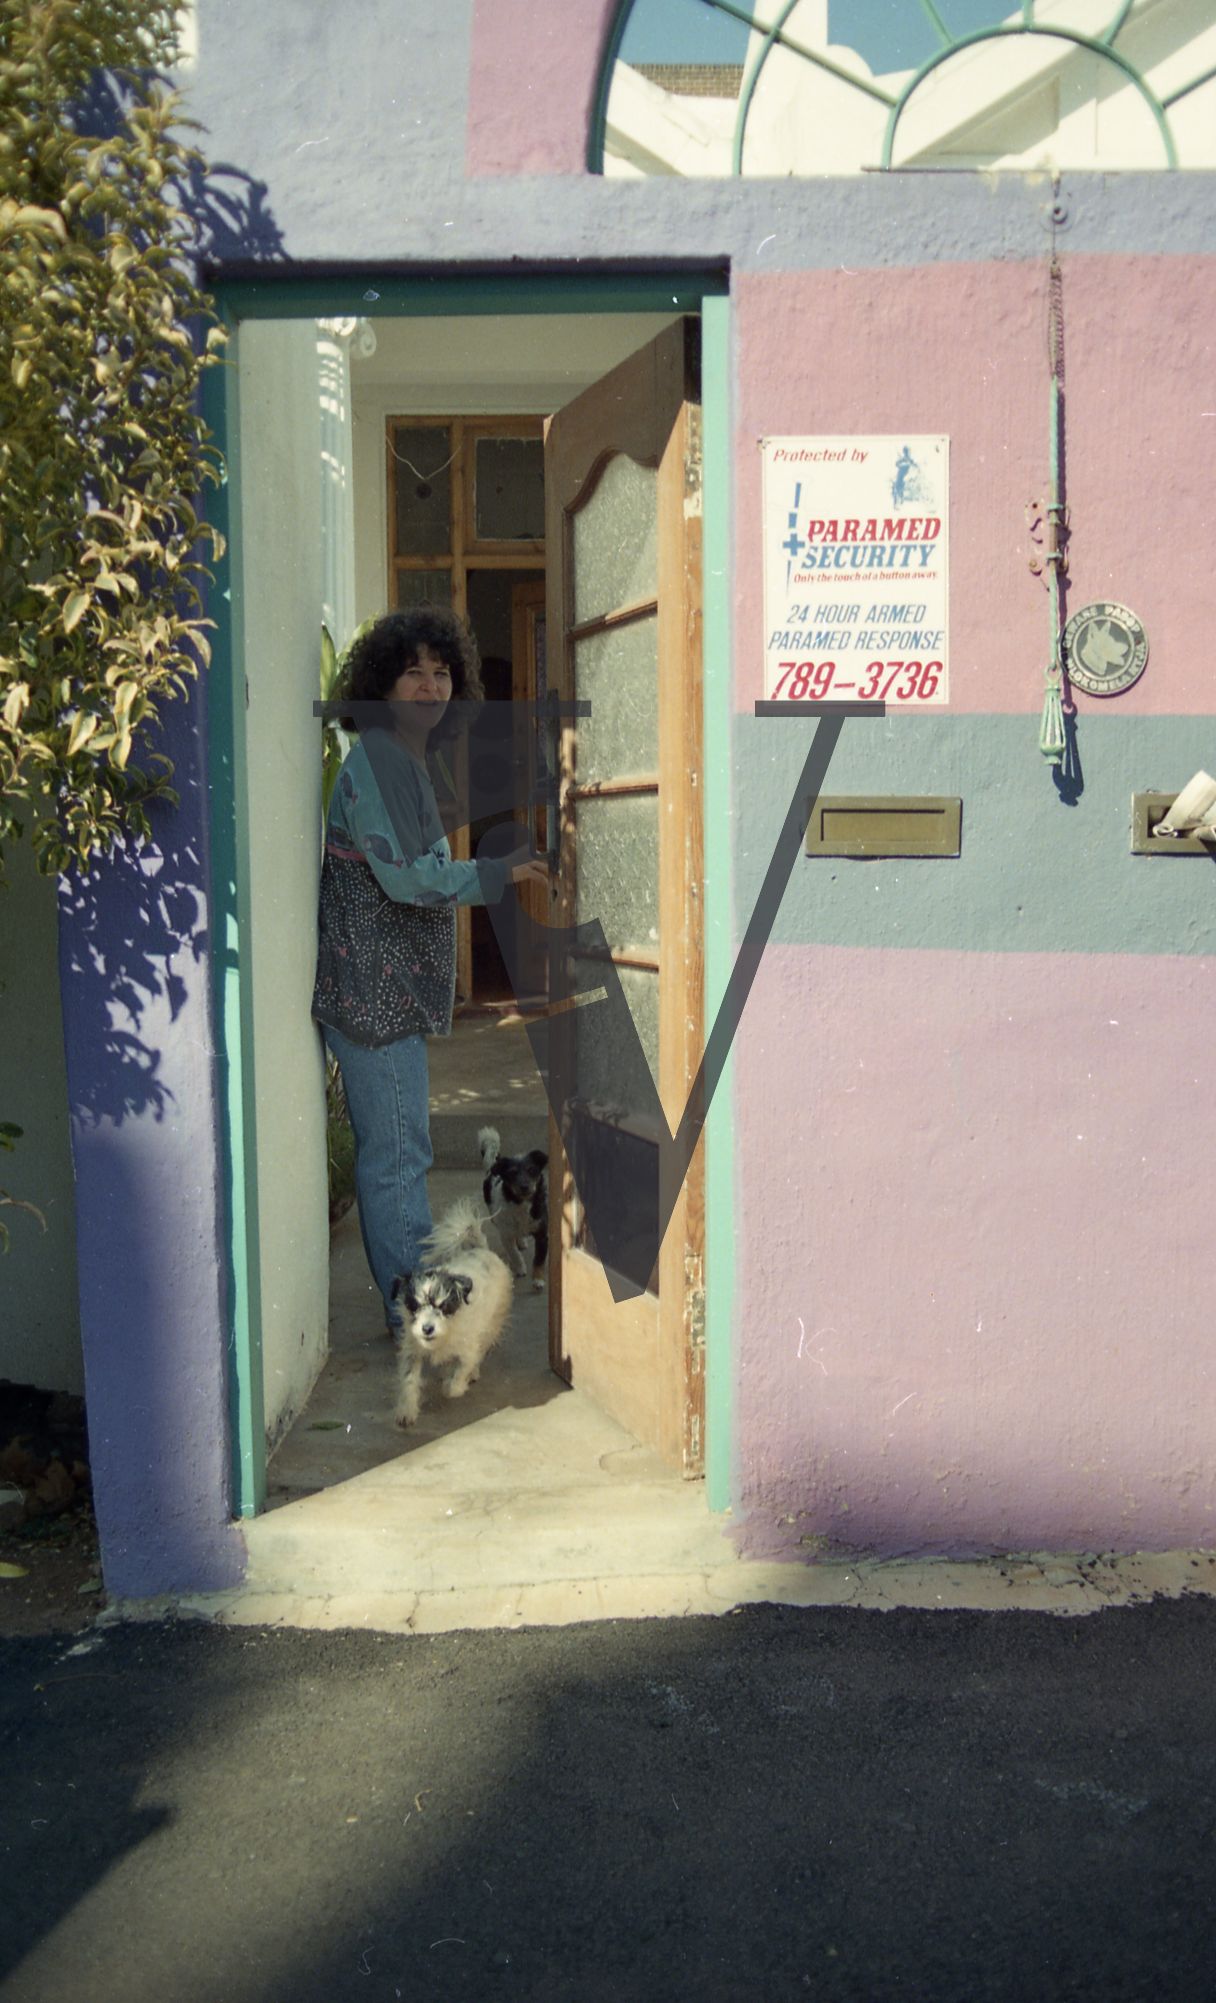 South Africa, white woman at door, welcoming, dogs running.